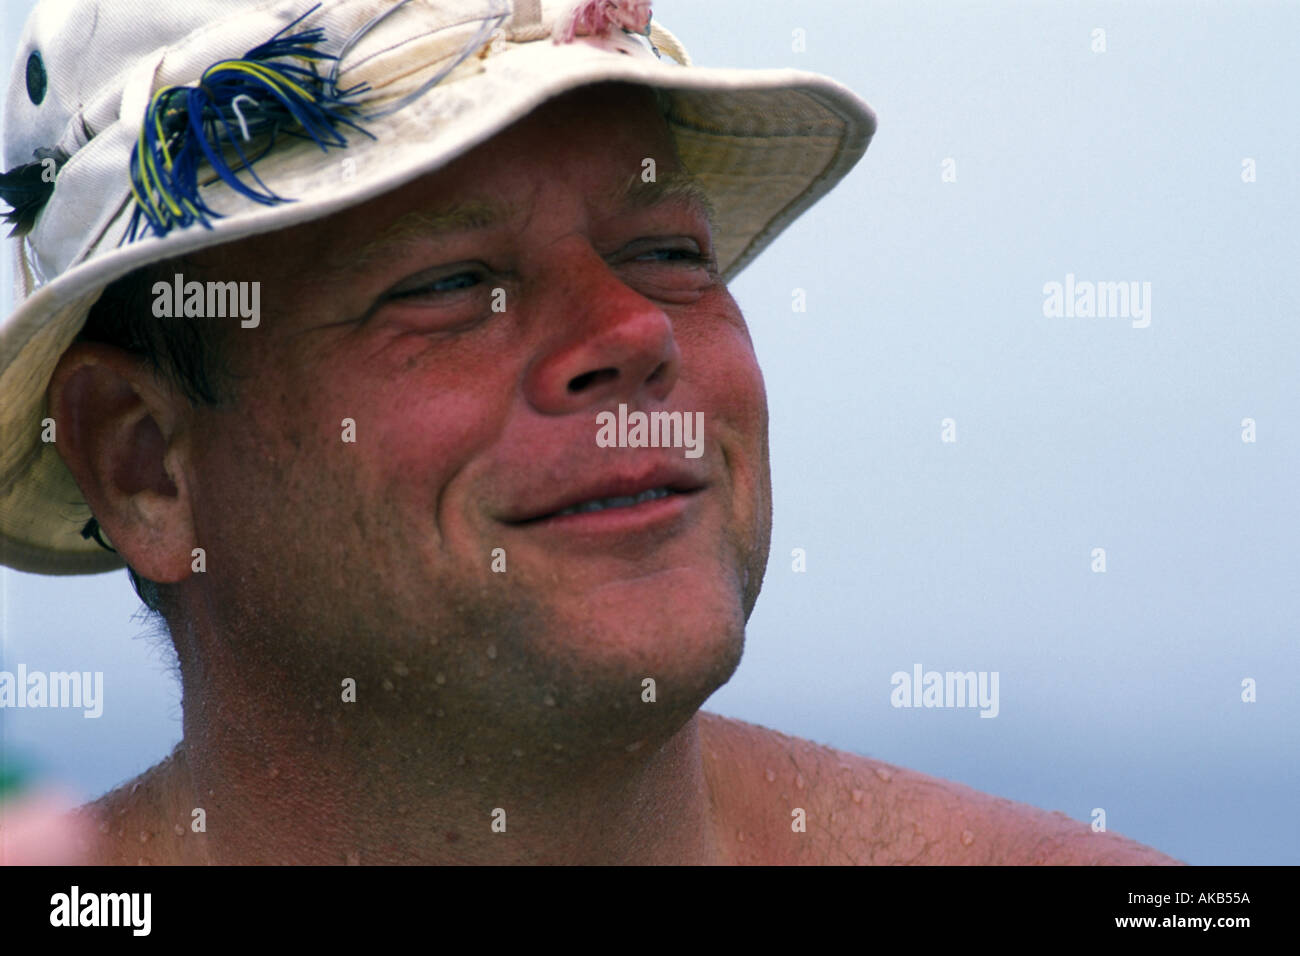 https://c8.alamy.com/comp/AKB55A/fishing-lures-dot-the-bucket-hat-of-a-relaxed-but-sunburned-sportsman-AKB55A.jpg